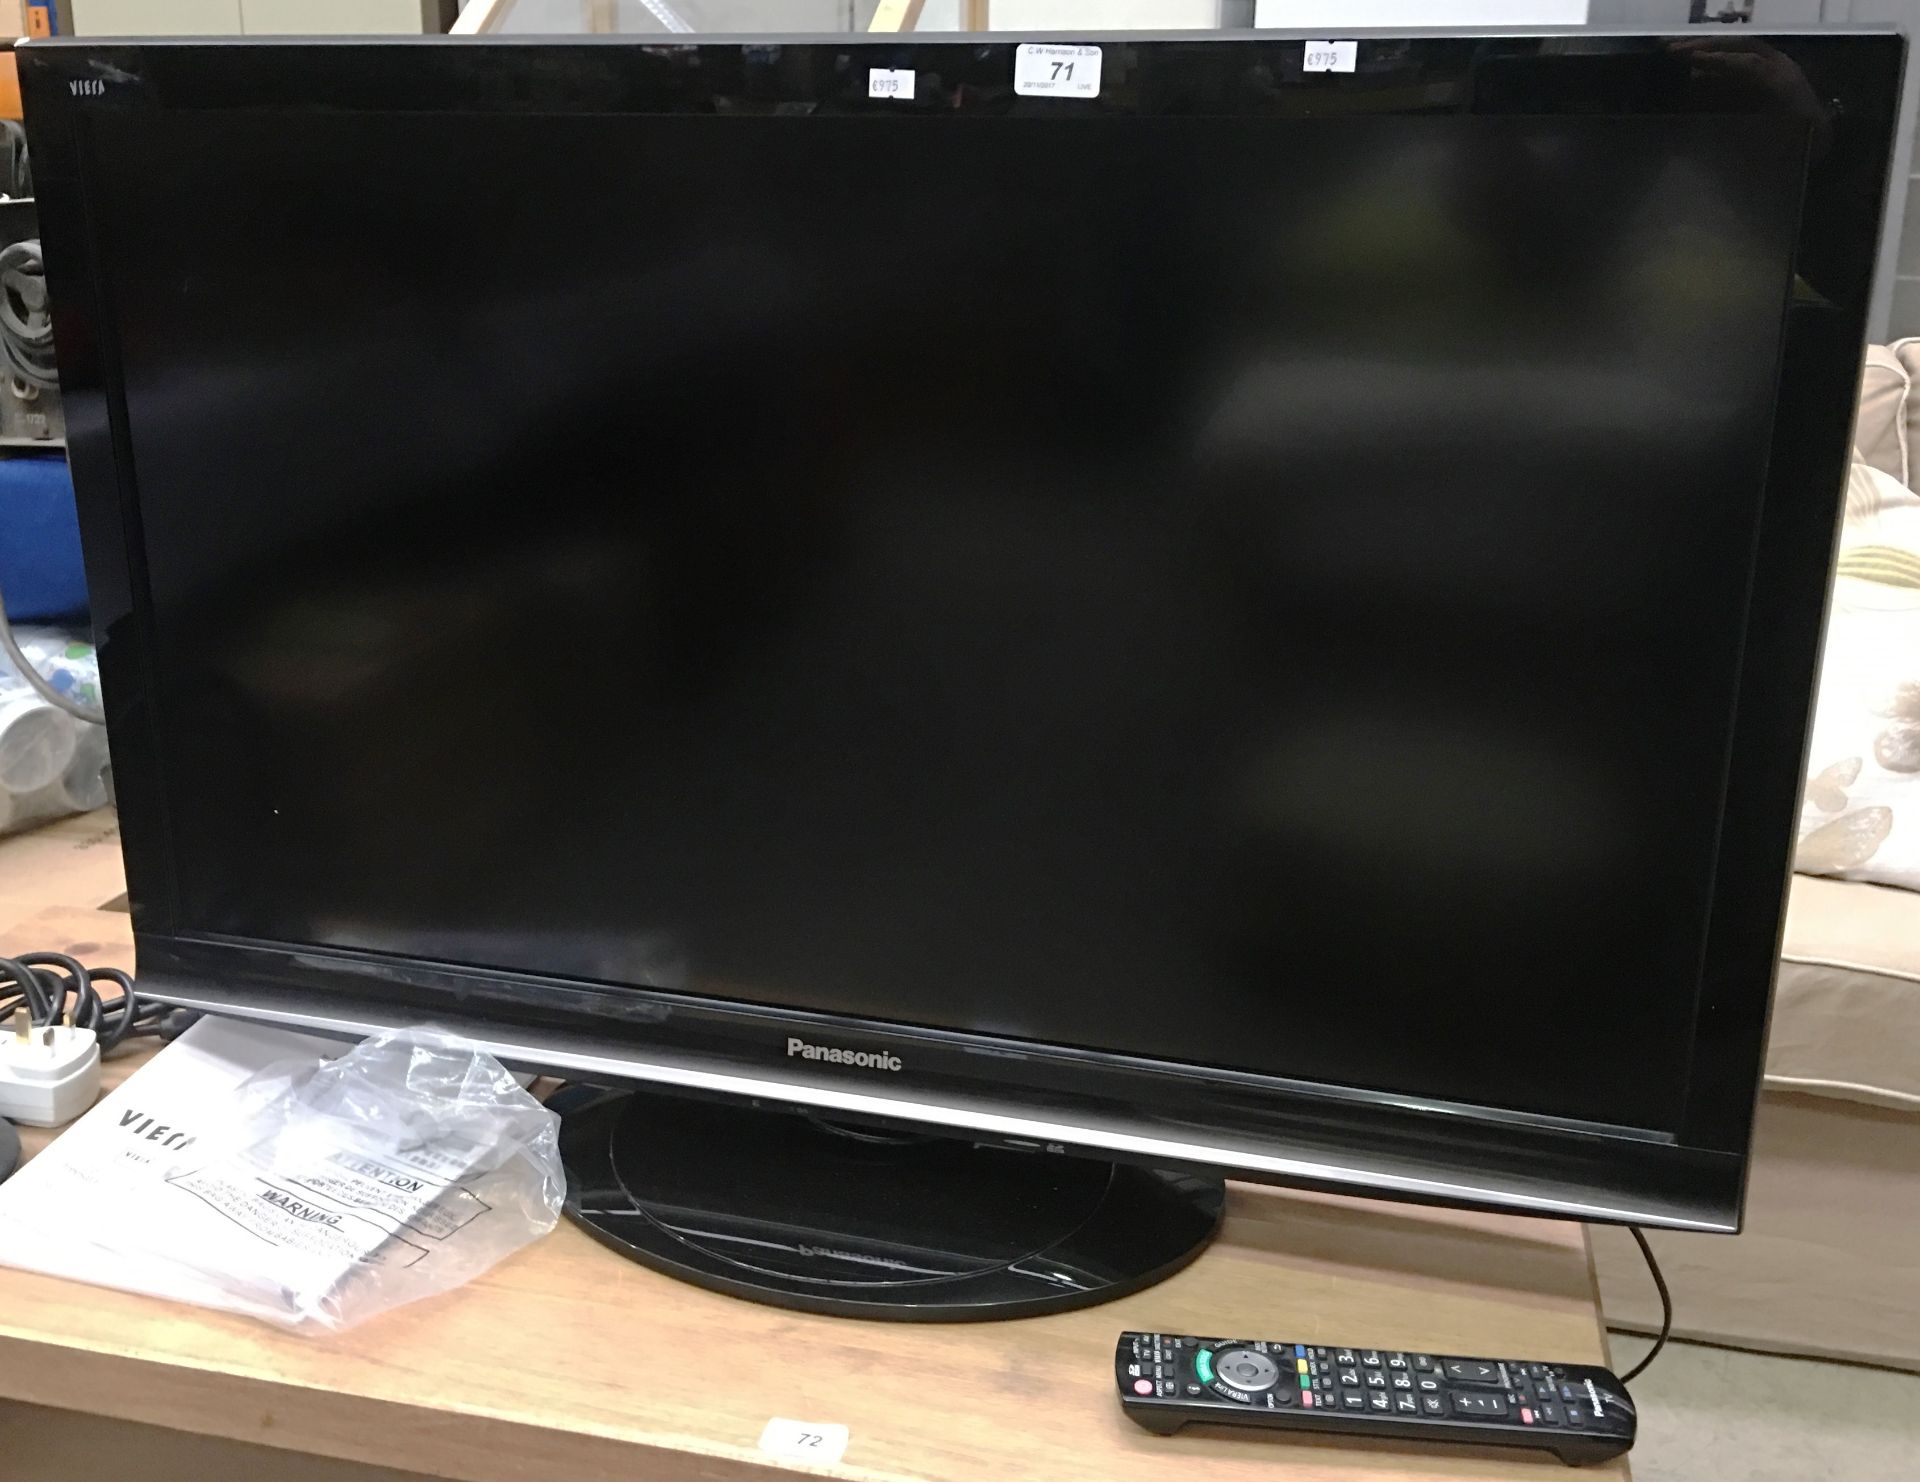 A Panasonic TX-L37G15B 37" LCD TV with power lead, remote control and manuals, and a Bush DVD player